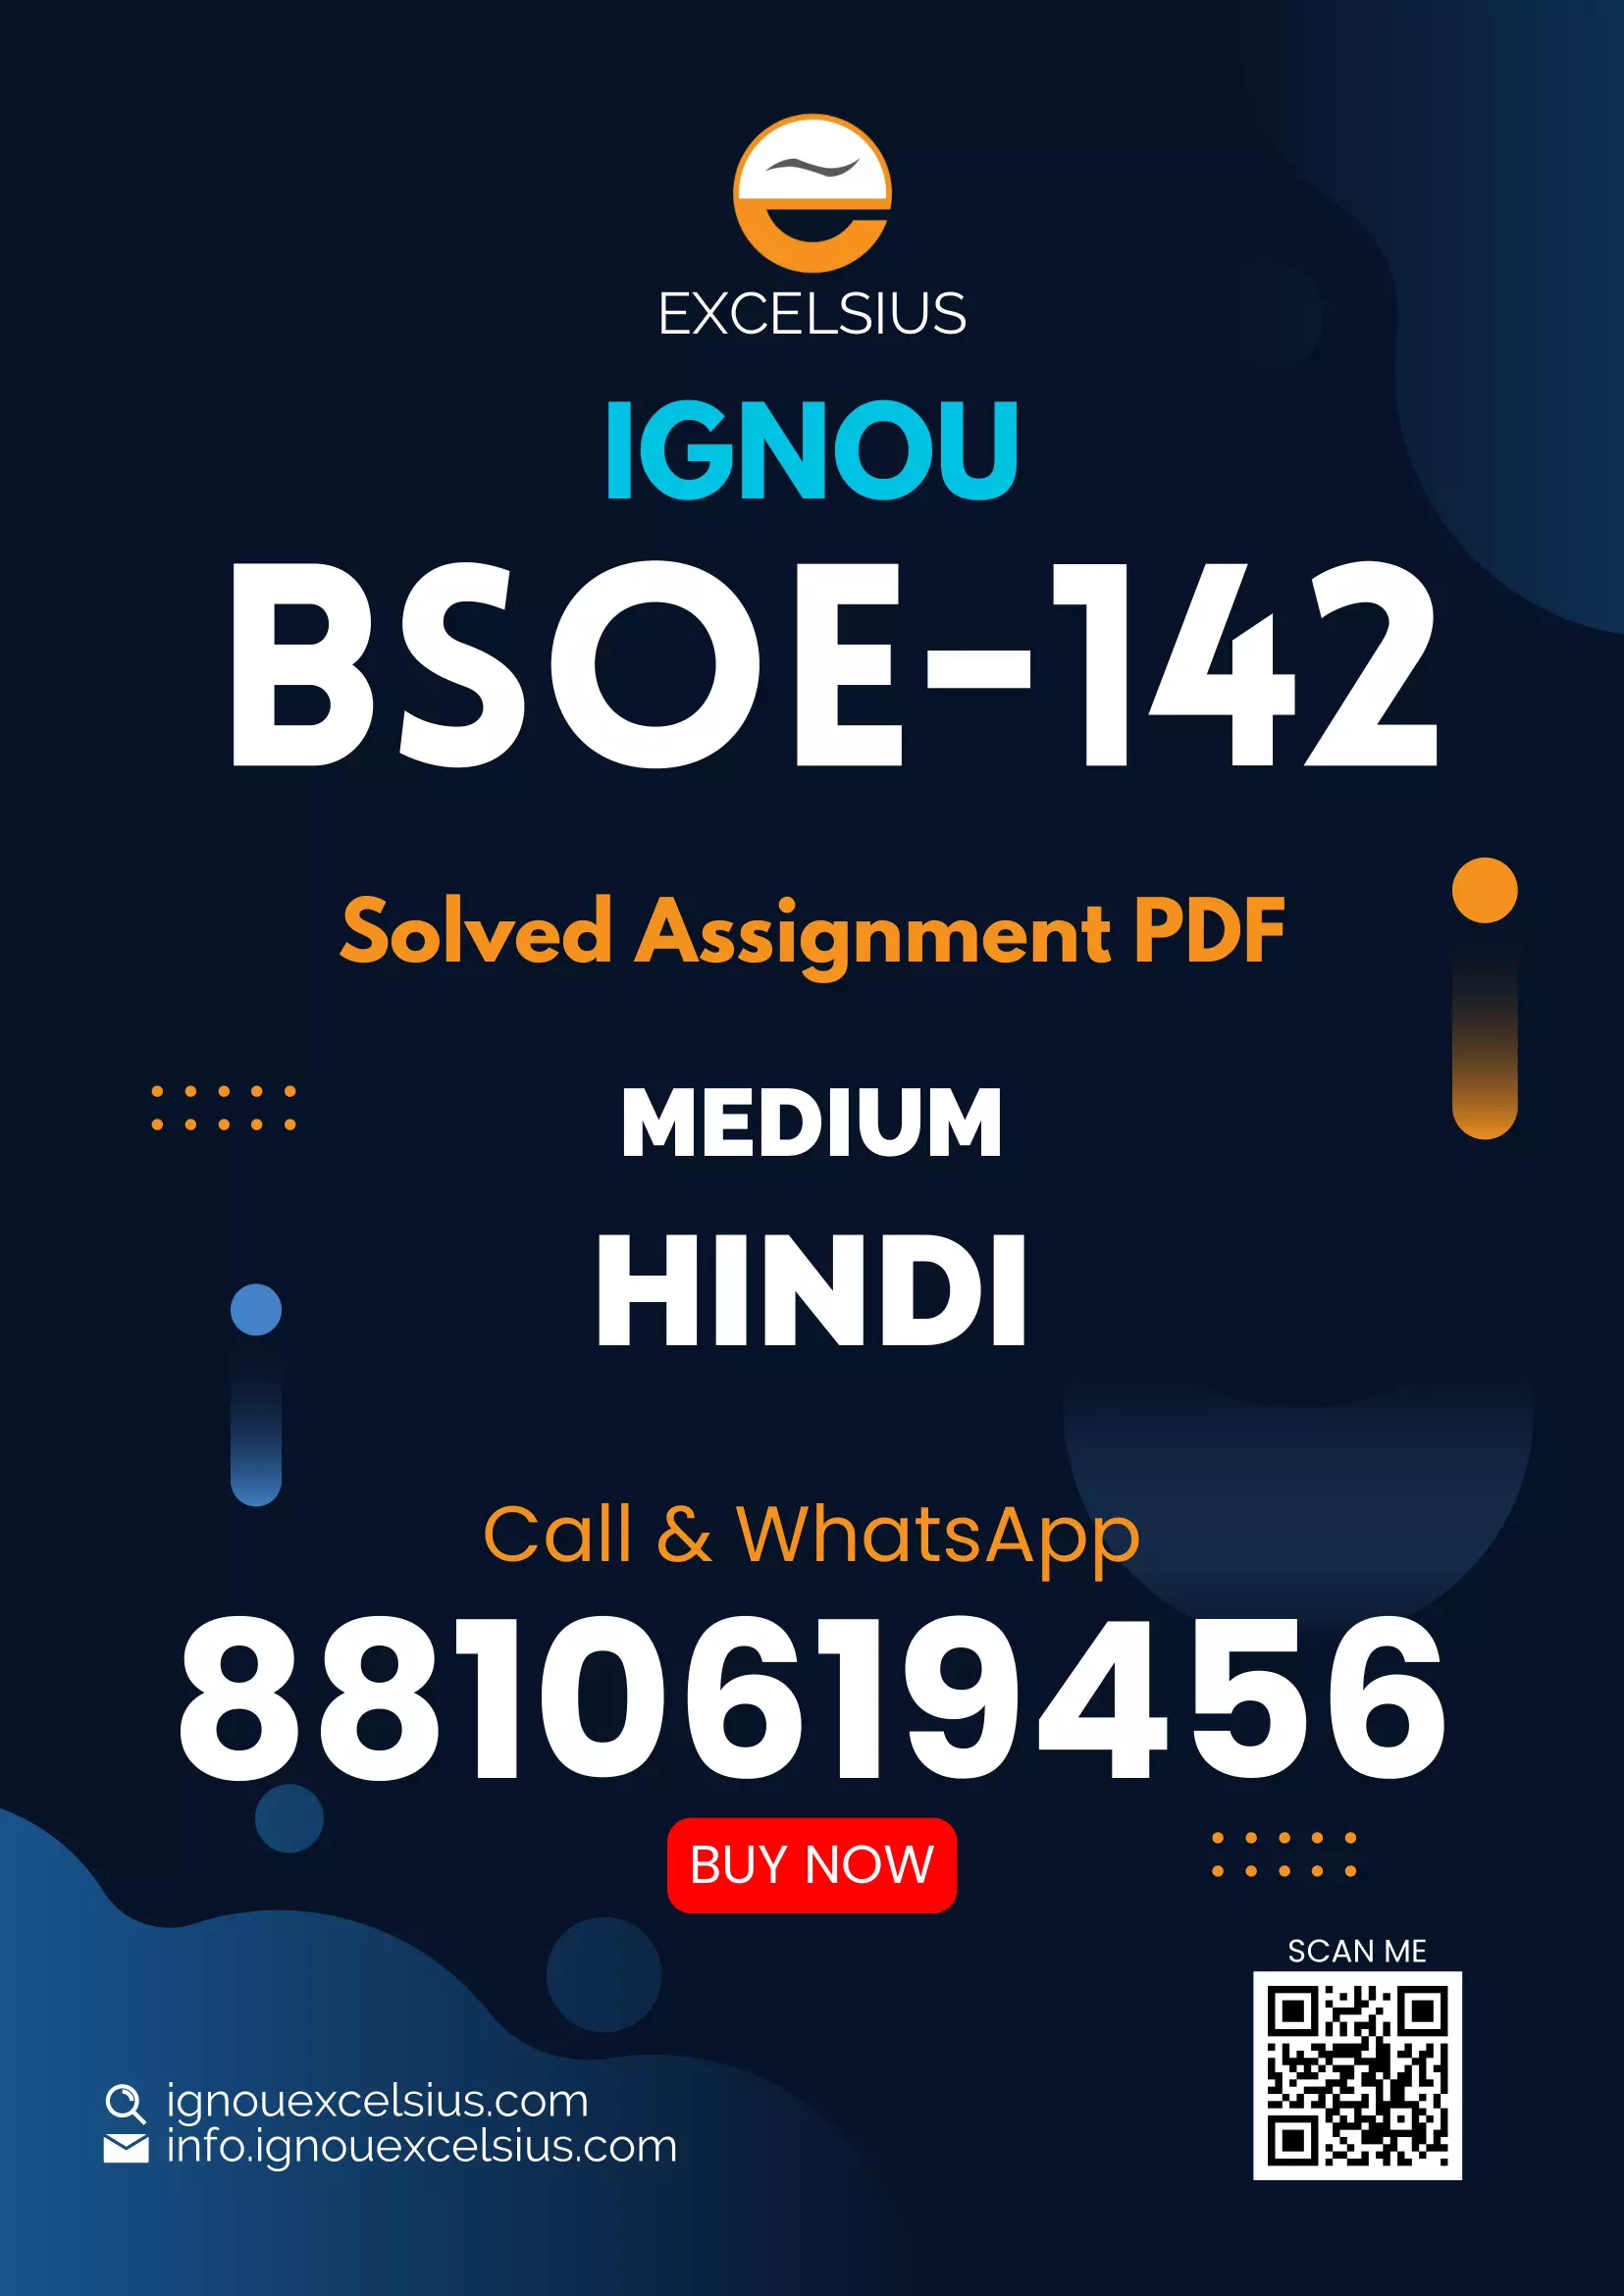 IGNOU BSOE-142 - Religion and Society, Latest Solved Assignment-July 2023 - January 2024